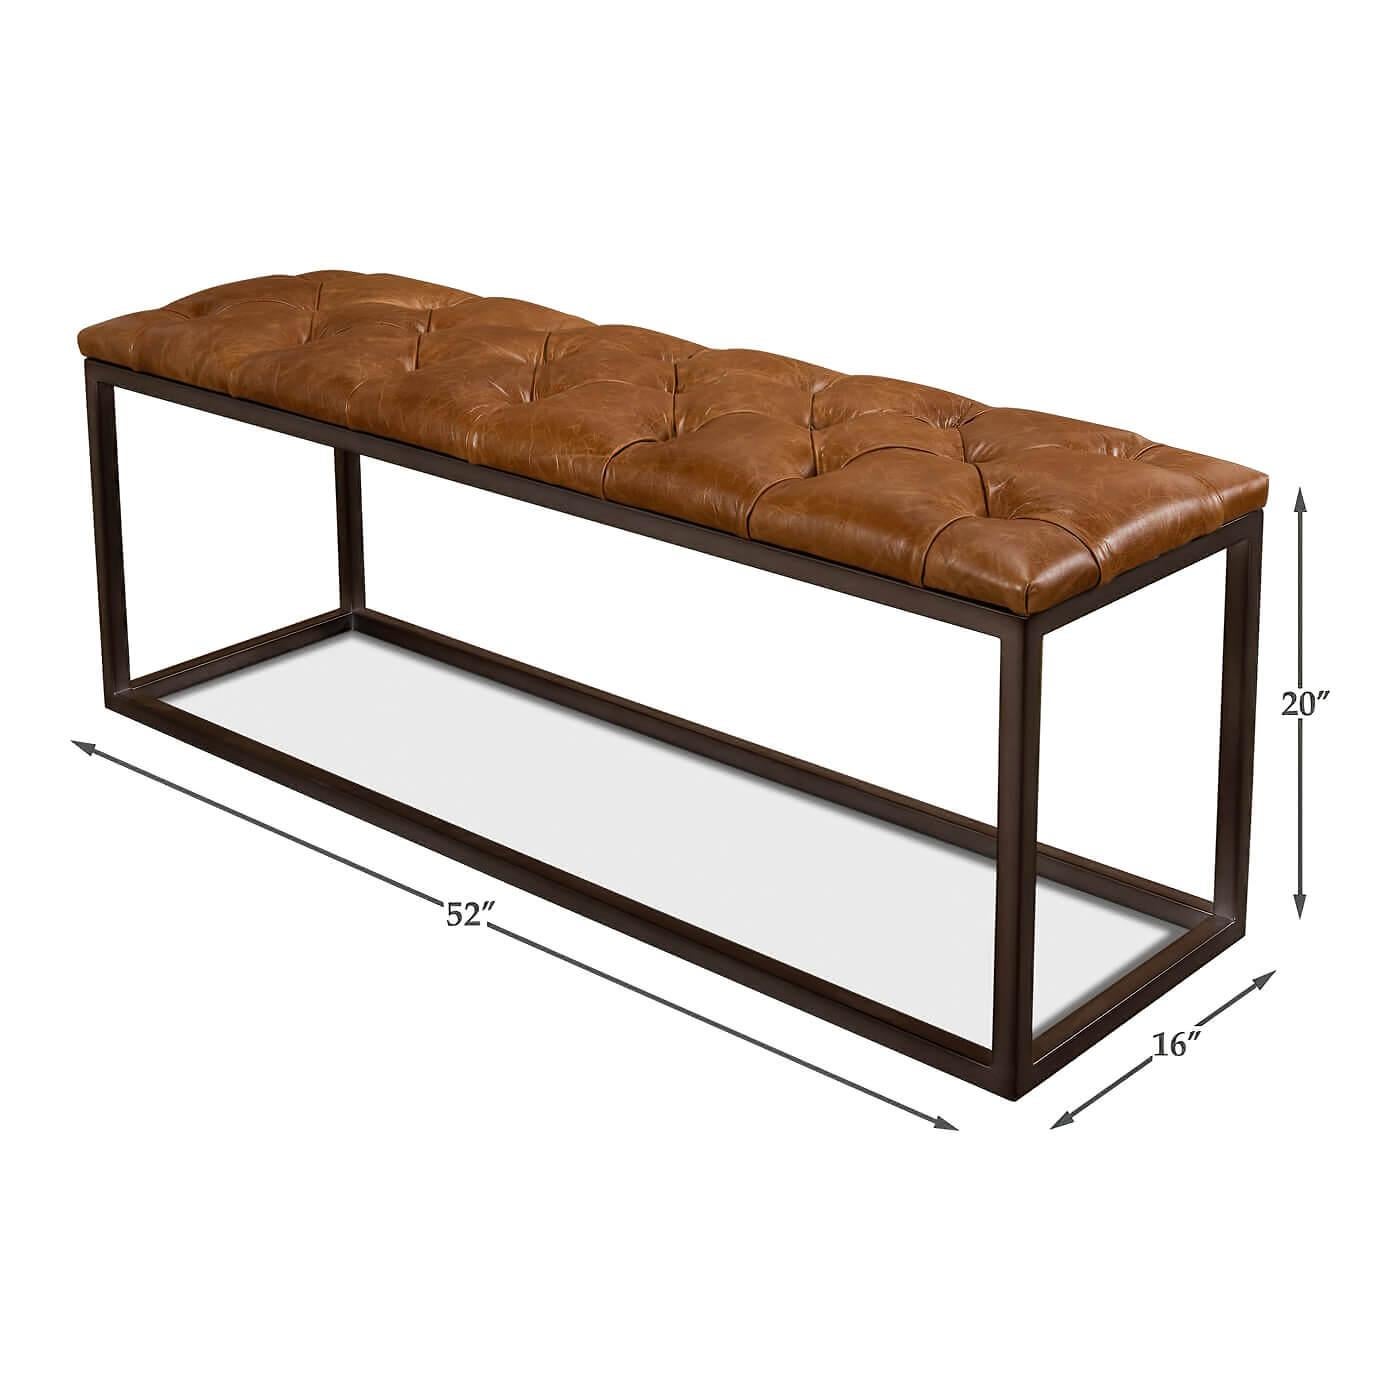 Contemporary Modern Tufted Leather Bench For Sale